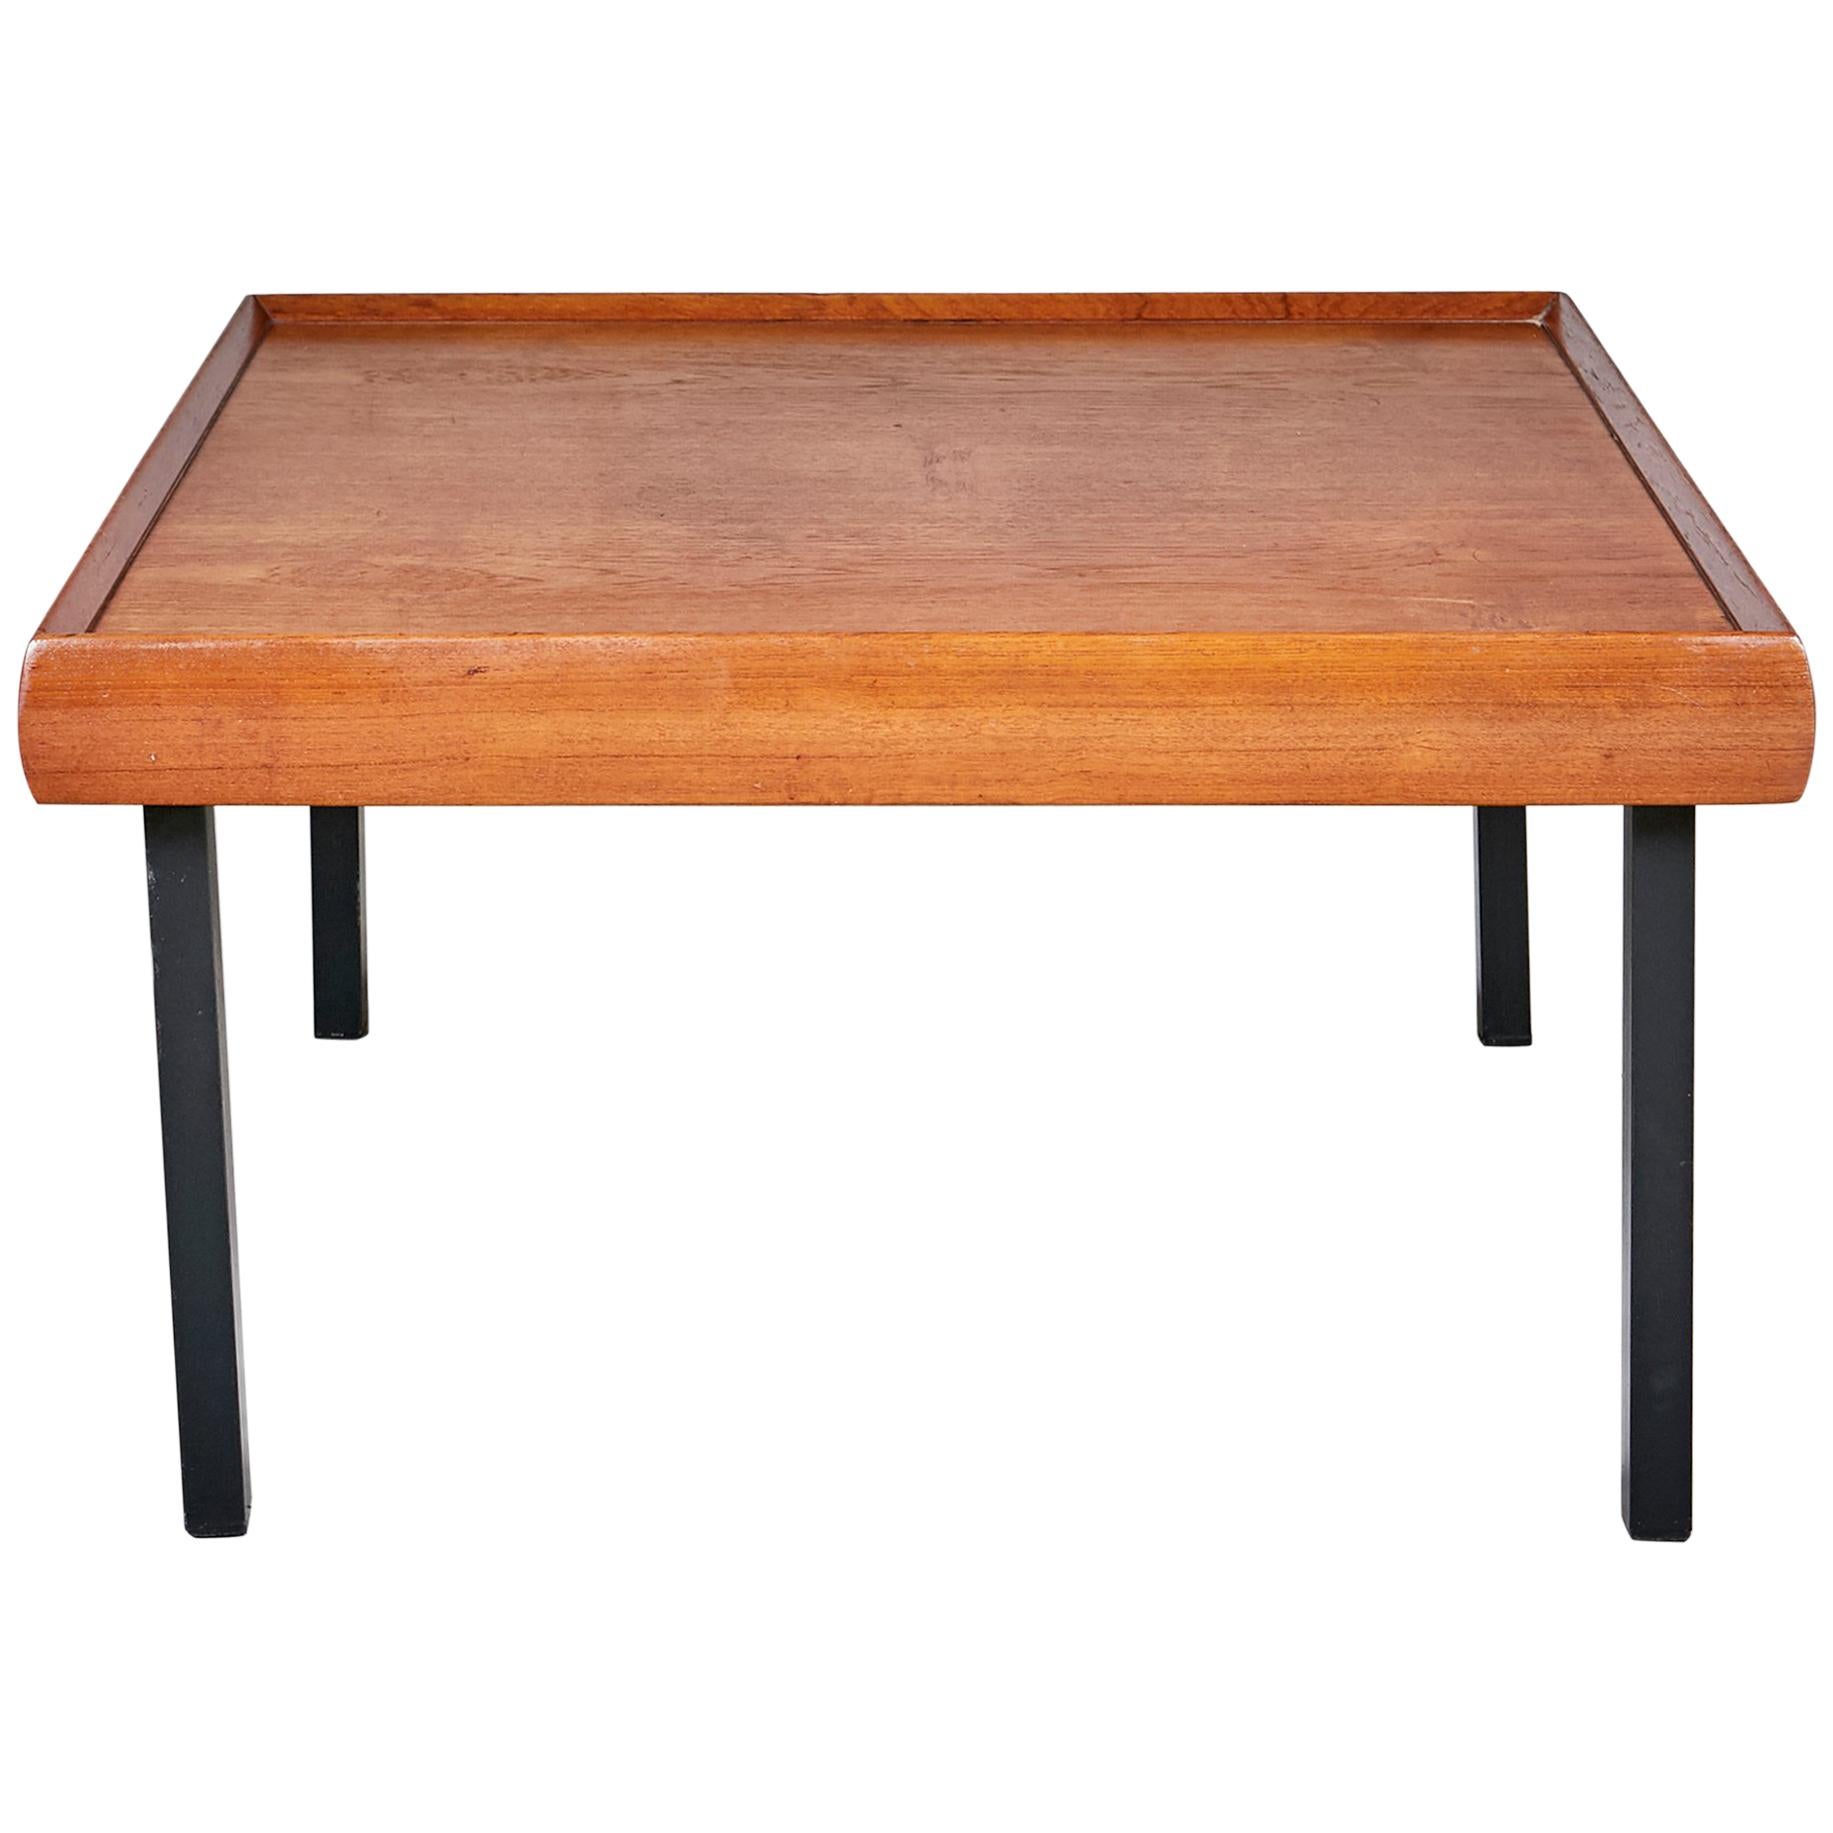 1970s Square Teak Wood Coffee Table For Sale